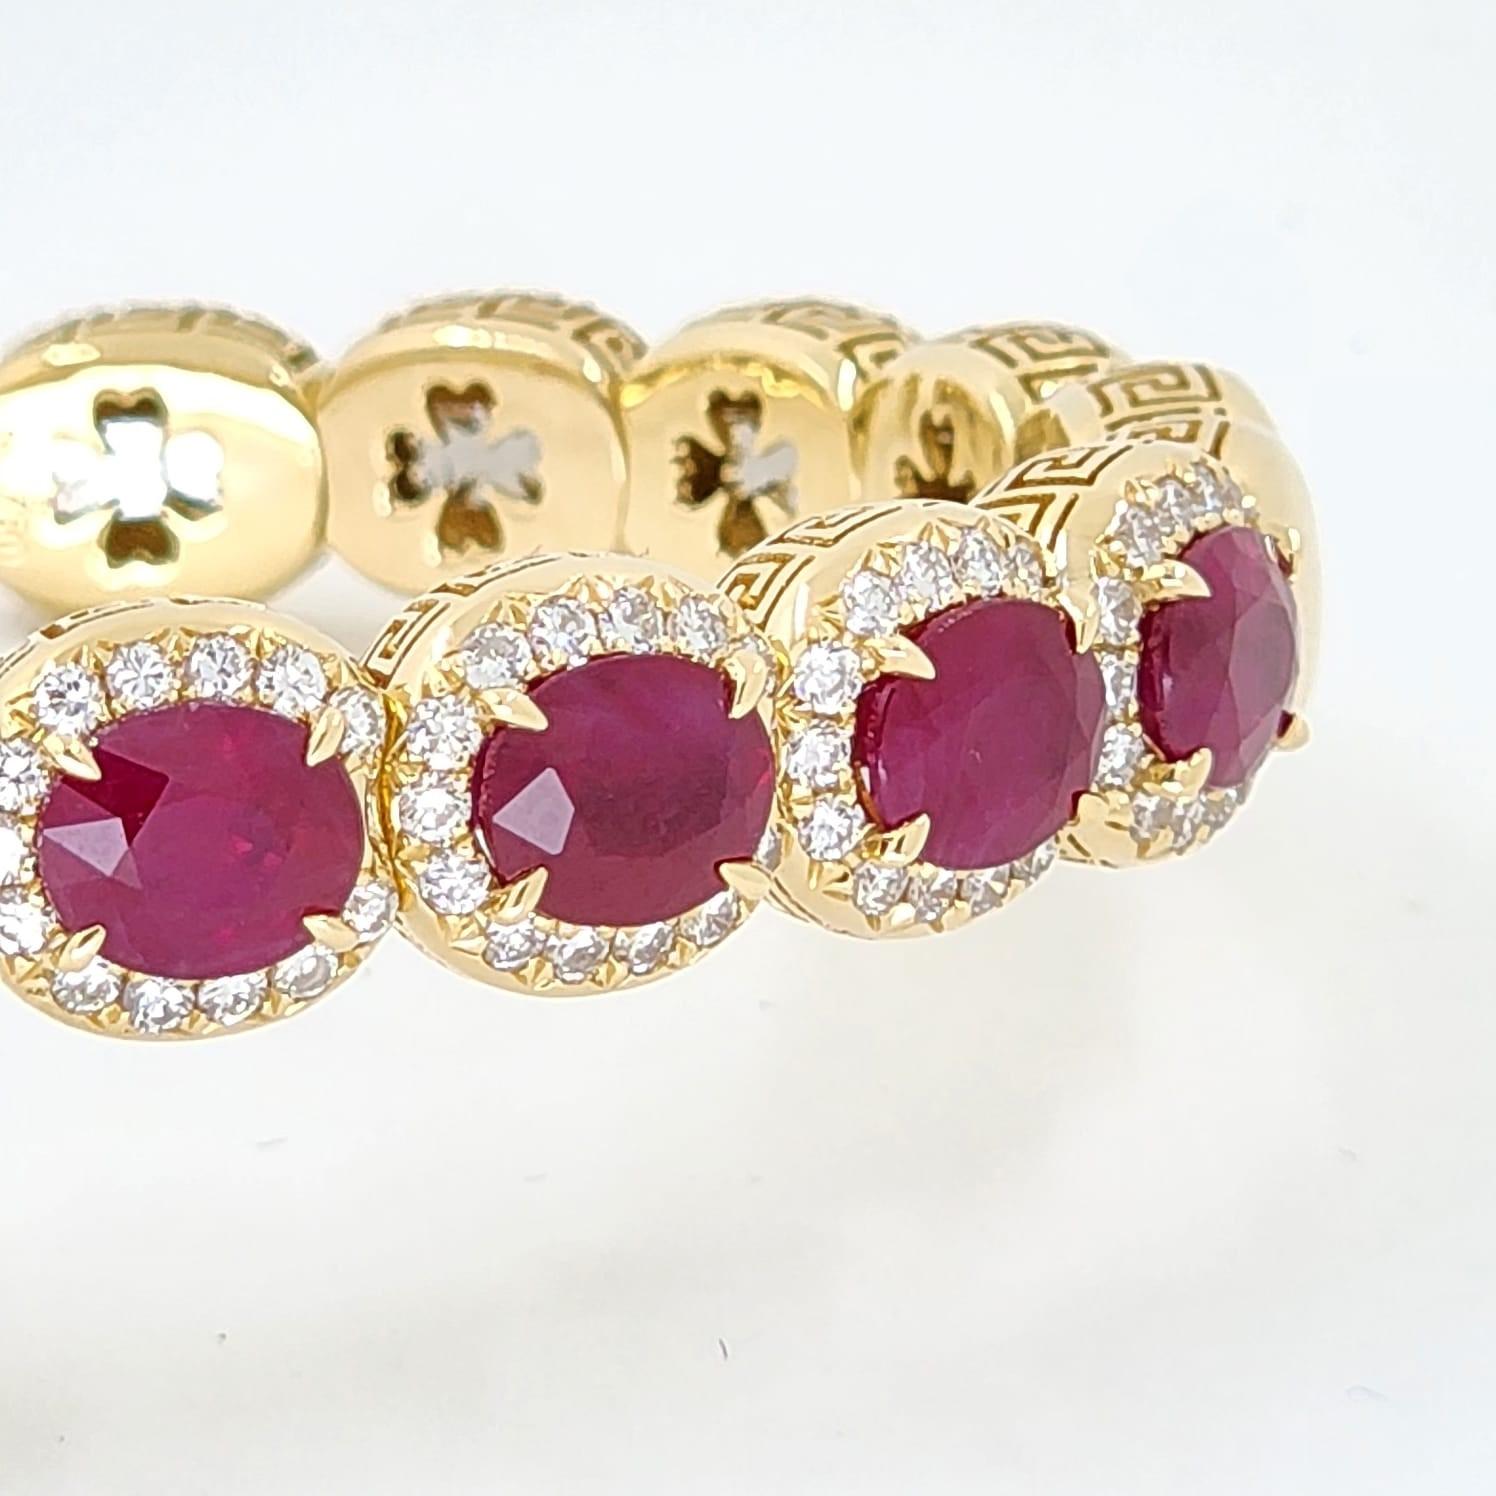 Contemporary Vintage 7.55 Carat Ruby Diamond Open Cuff Bangle Bracelet in 18K Yellow Gold For Sale